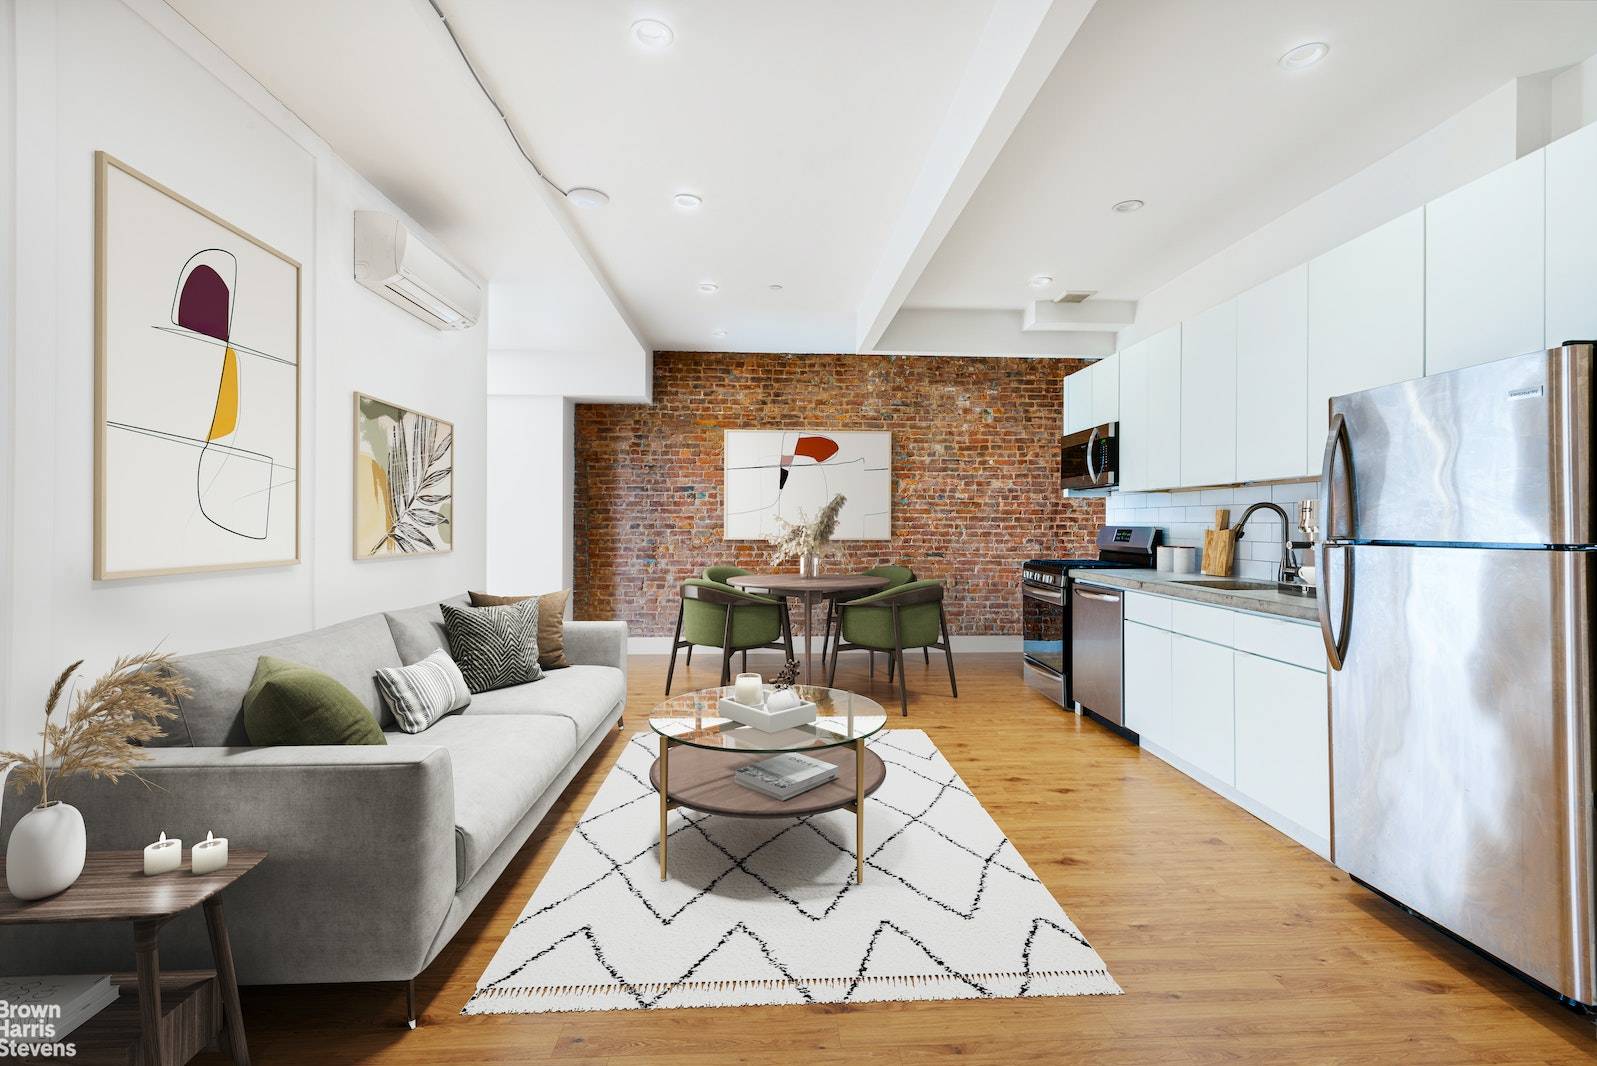 Renovated apartment with modern kitchen on Wilson Avenue in BushwickThis apartment features a renovated kitchen with full sized stainless steel appliances, ample closet space, and hardwood floors throughout.